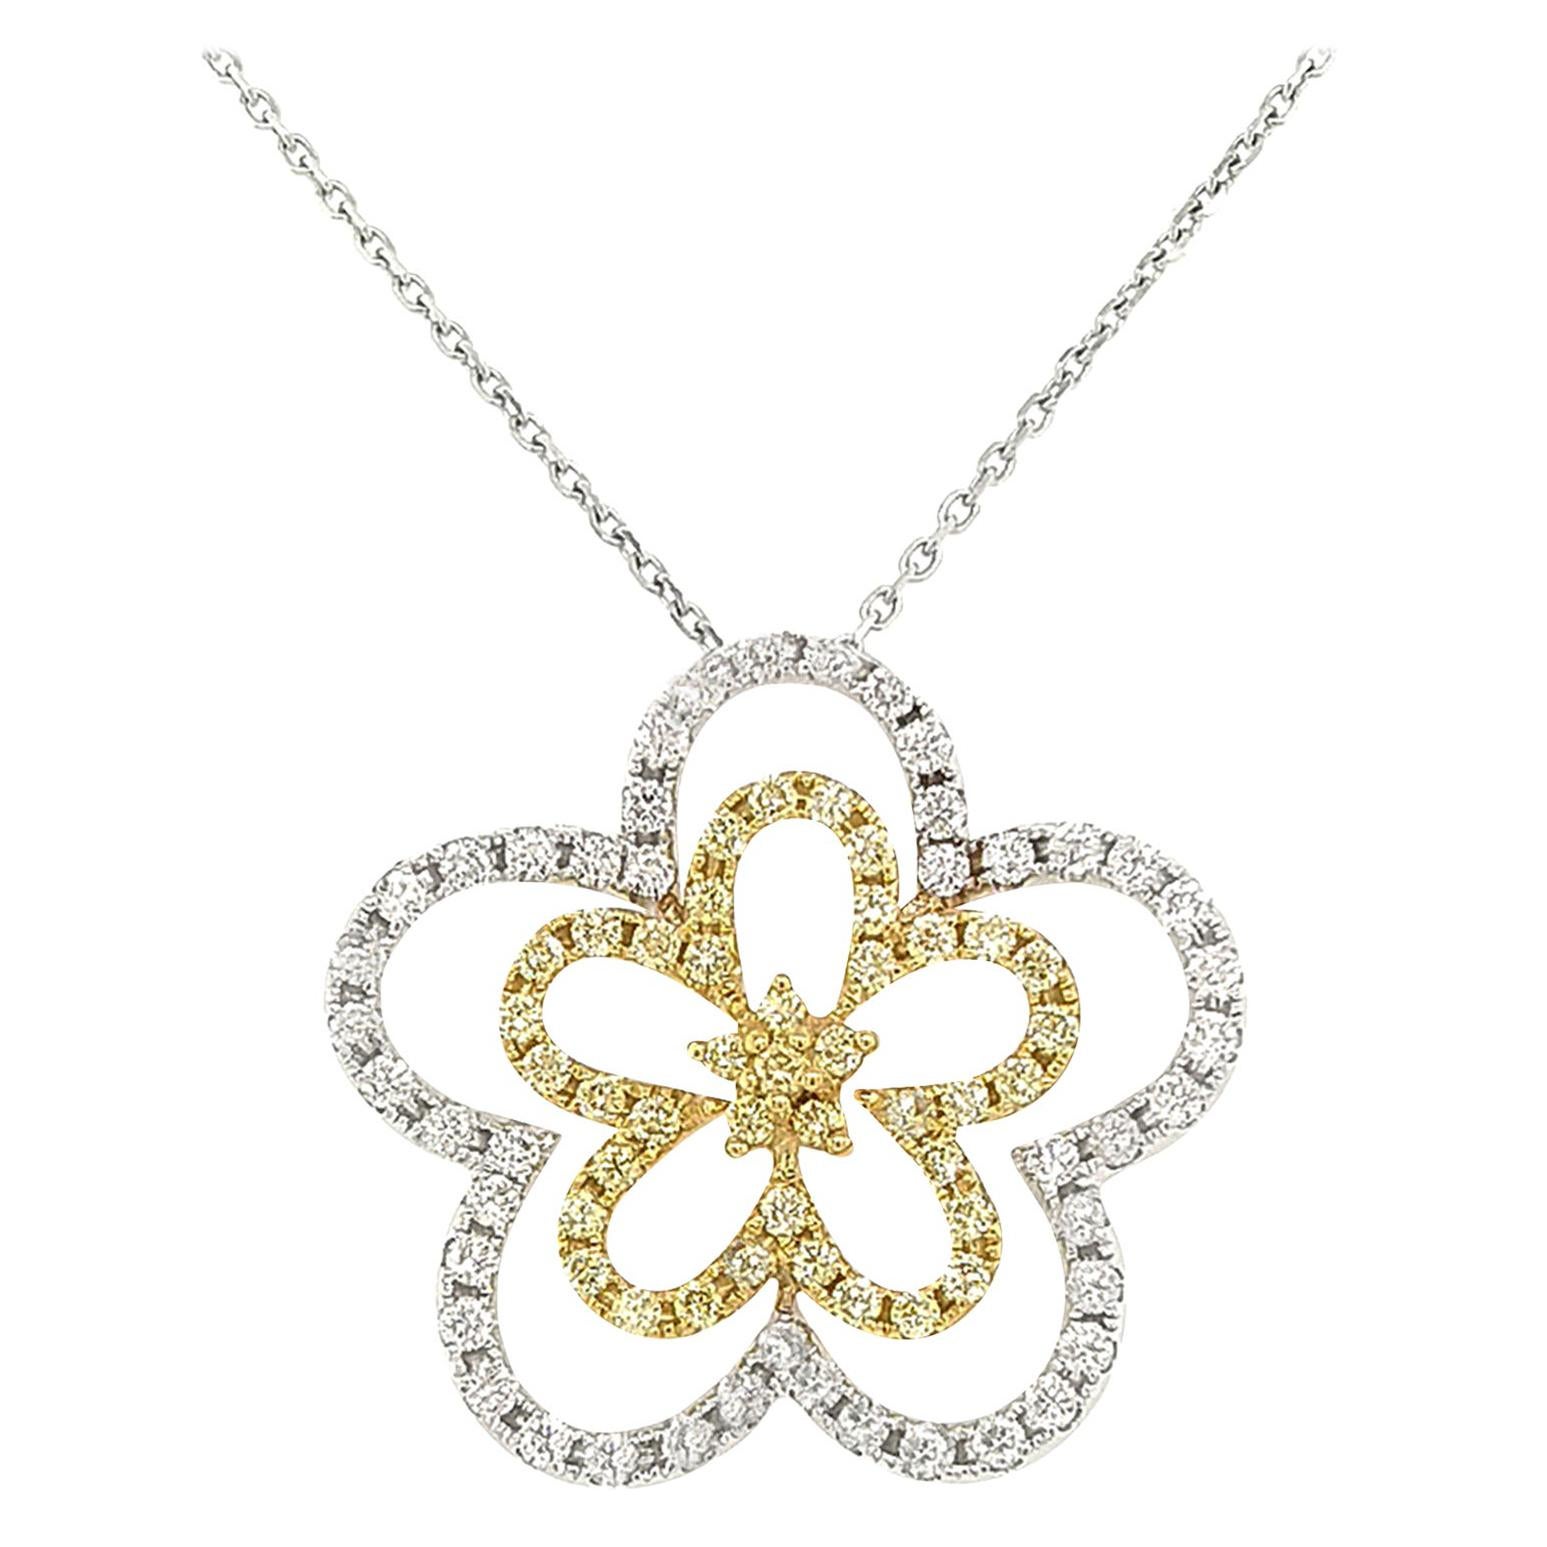 Natural Yellow Diamond and White Diamond in K18 Gold Pendant with Chain